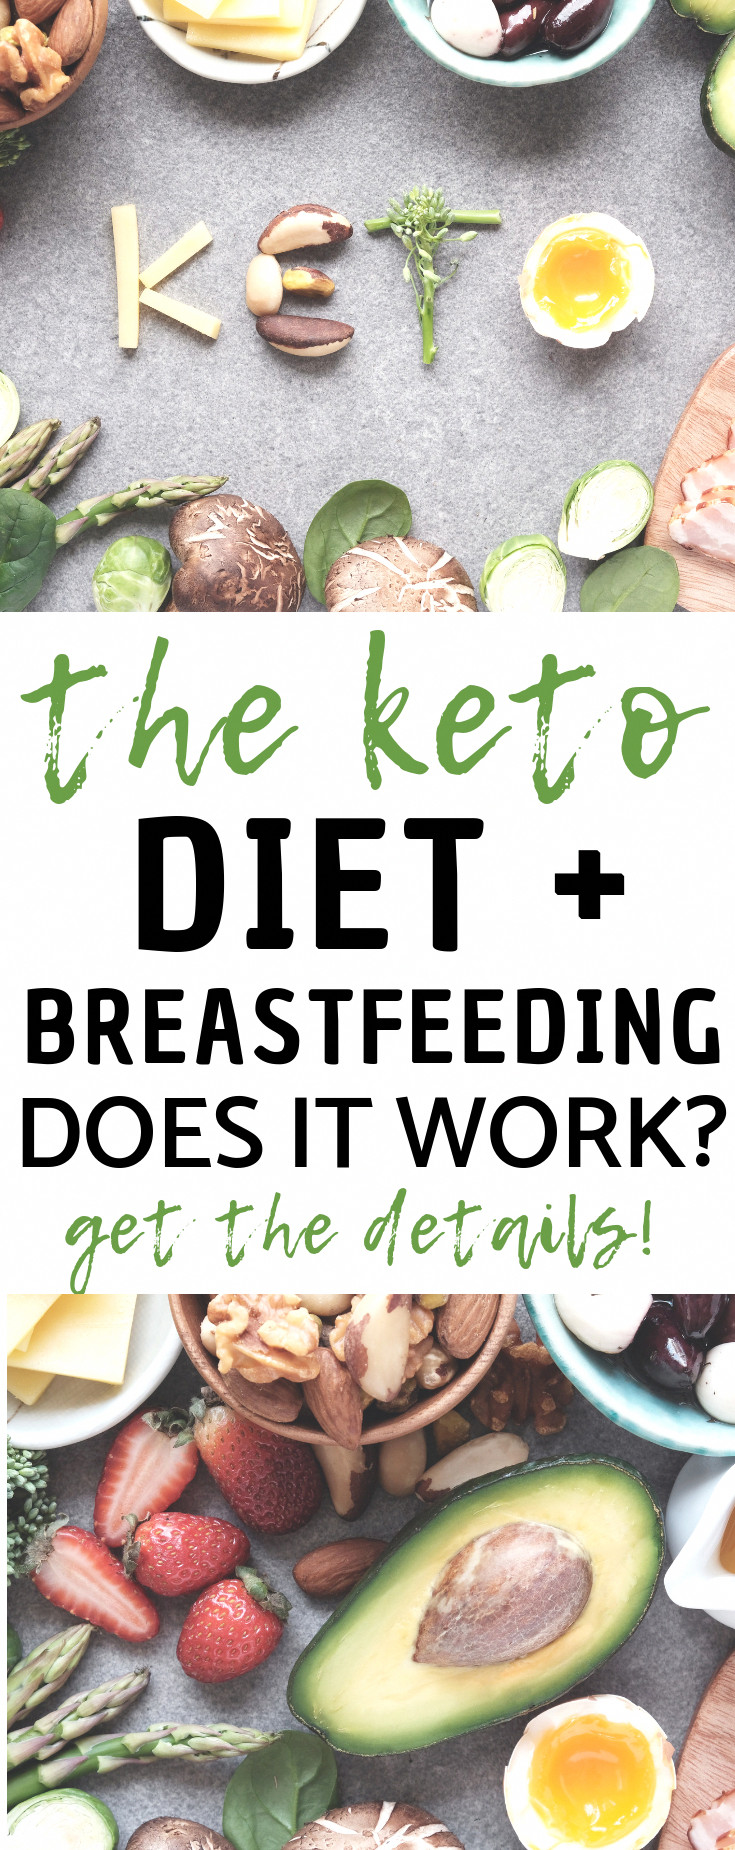 Keto Diet While Breastfeeding
 The keto t while breastfeeding can be a great way to